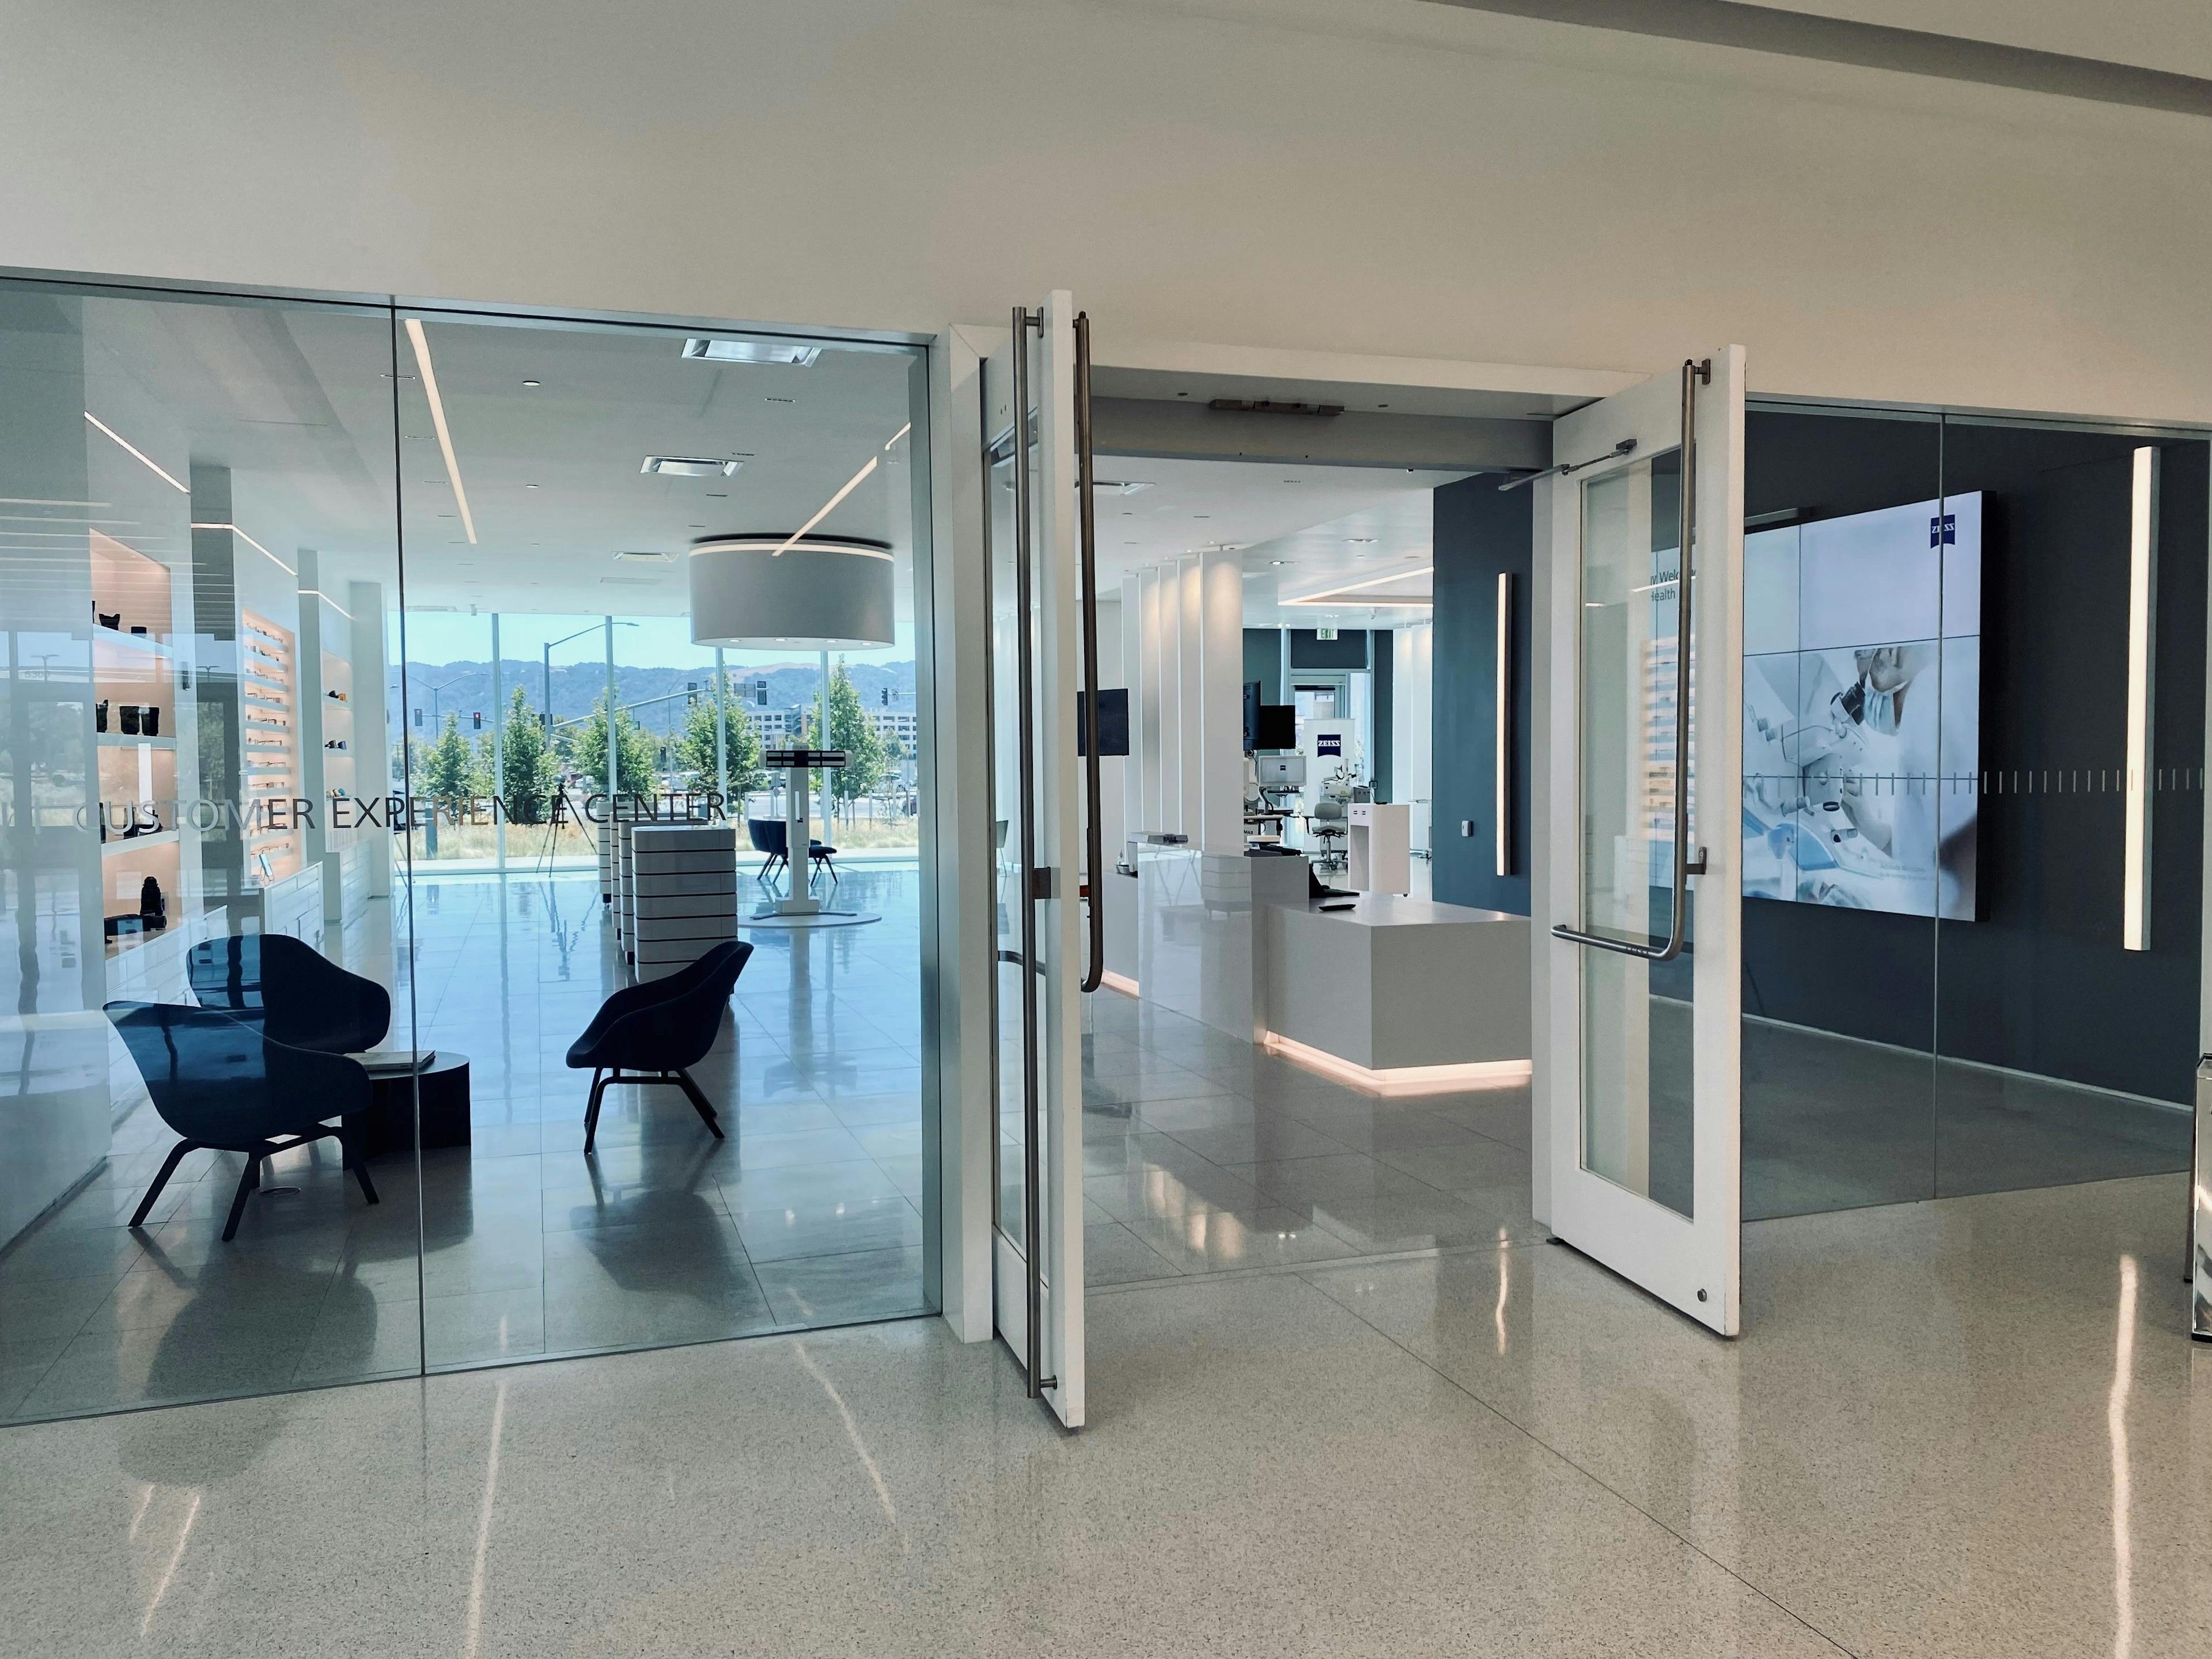 The Zeiss Customer Experience Center features an Innovation Lab demonstrating the company’s several Zeiss workflows. 